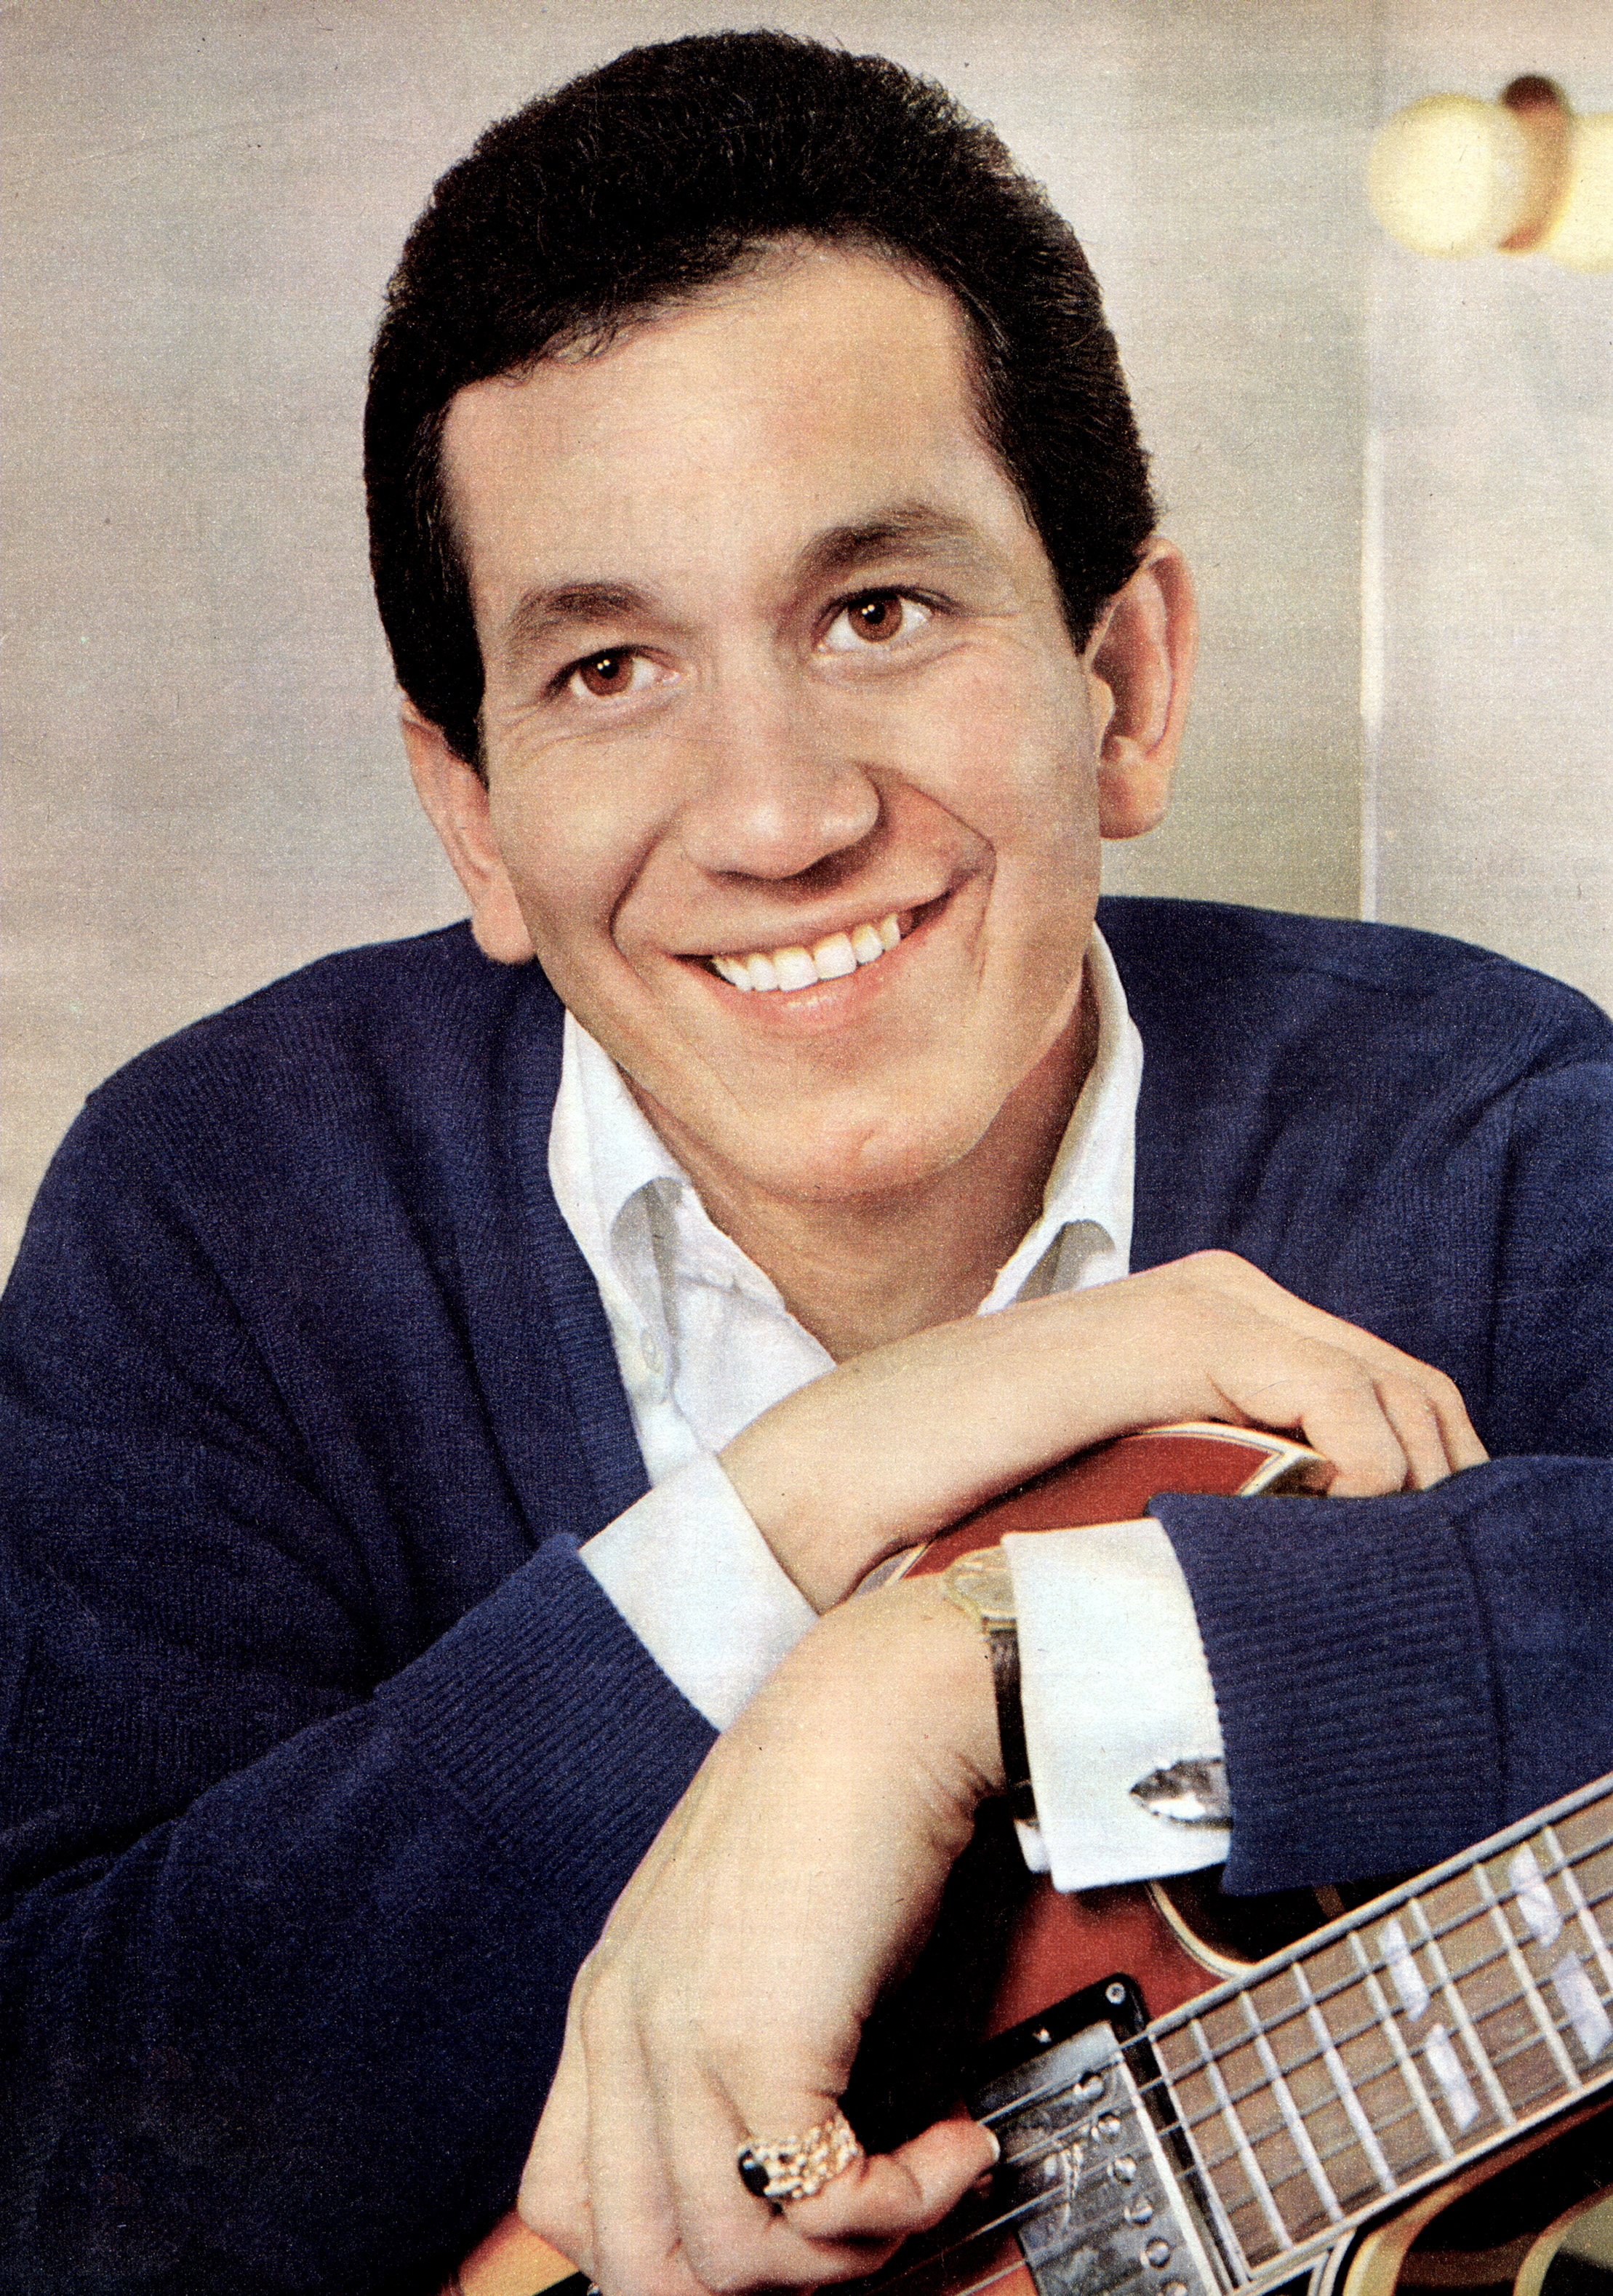 <p>Trini Lopez, who found fame in the 1960s with his mix of  folk, Latin and rockabilly music -- his biggest records were "If I Had a Hammer" and "Lemon Tree" -- died on Aug. 11 at a hospital in Rancho Mirage, California, from complications of COVID-19. He was 83.</p>